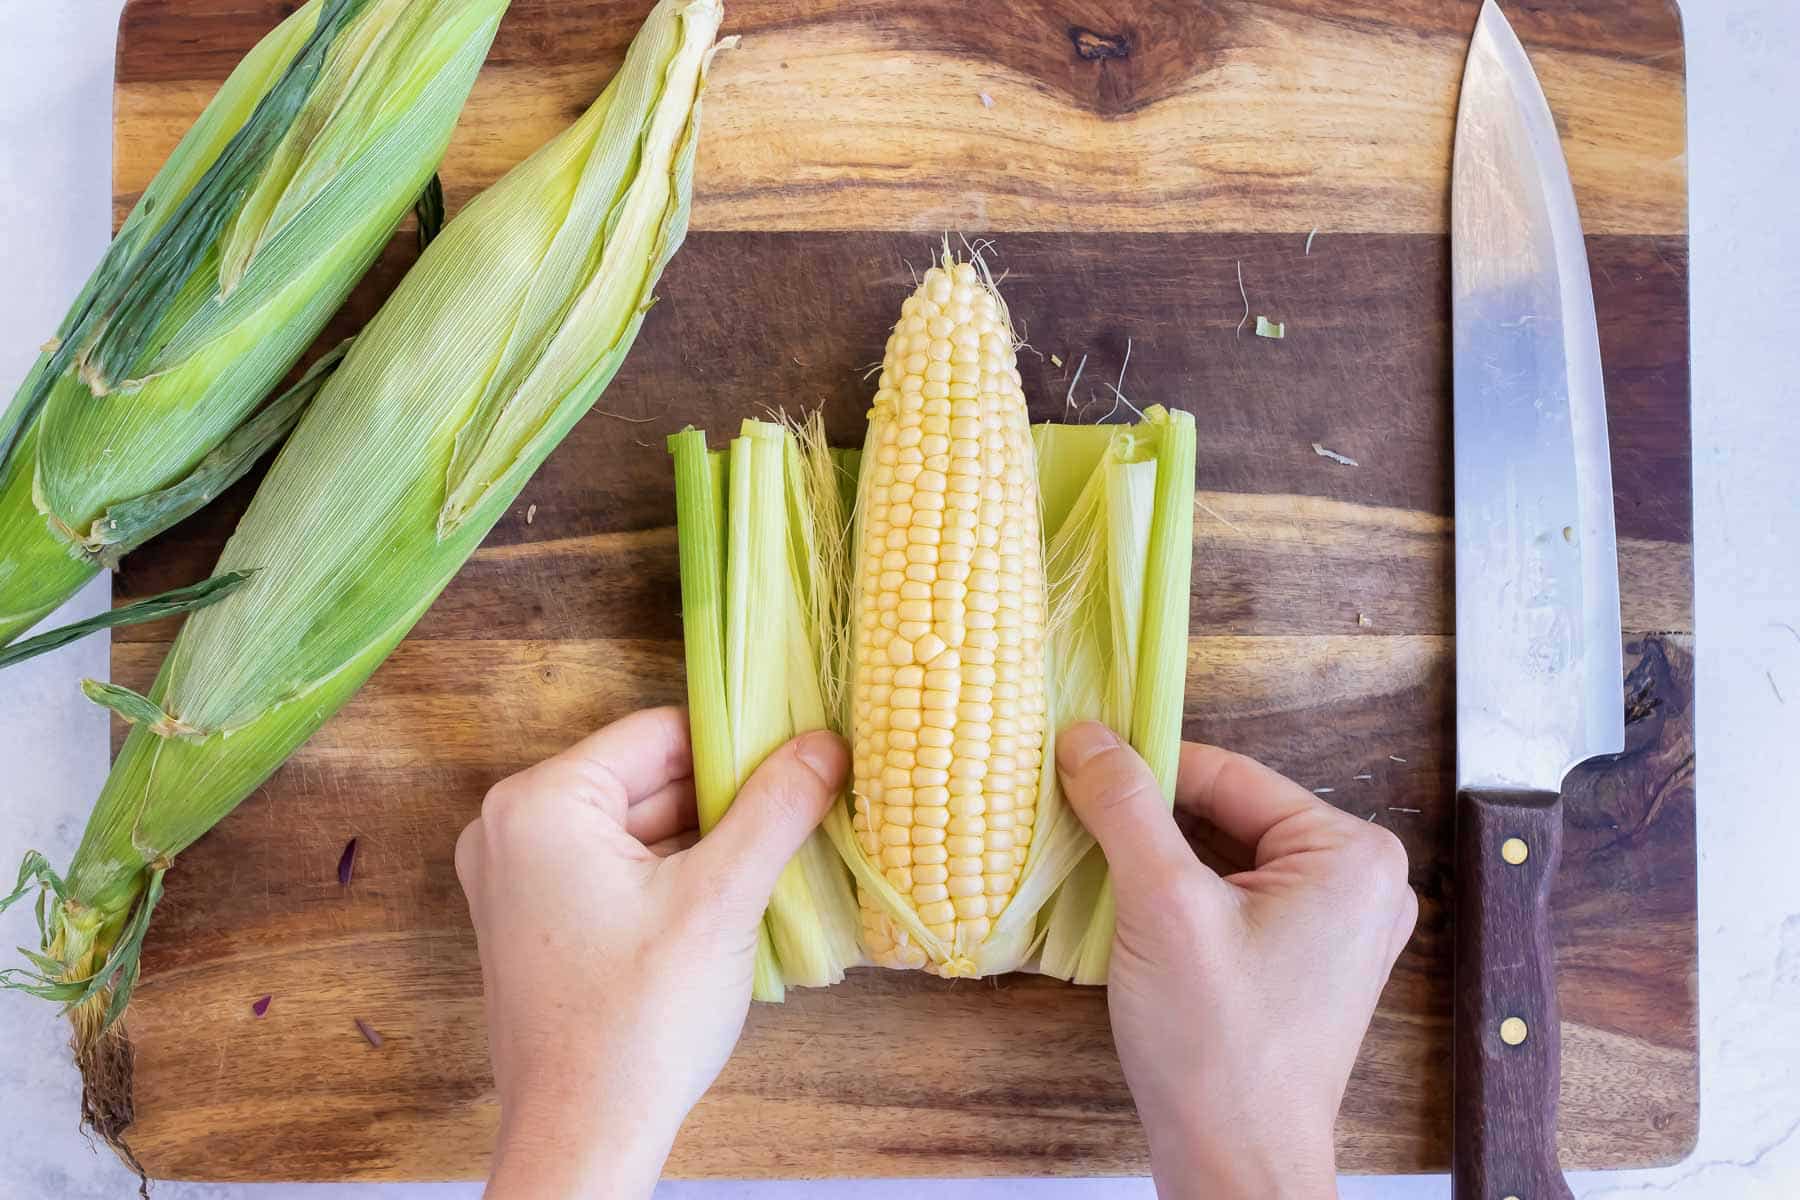 Hands pull the husks off of corn.